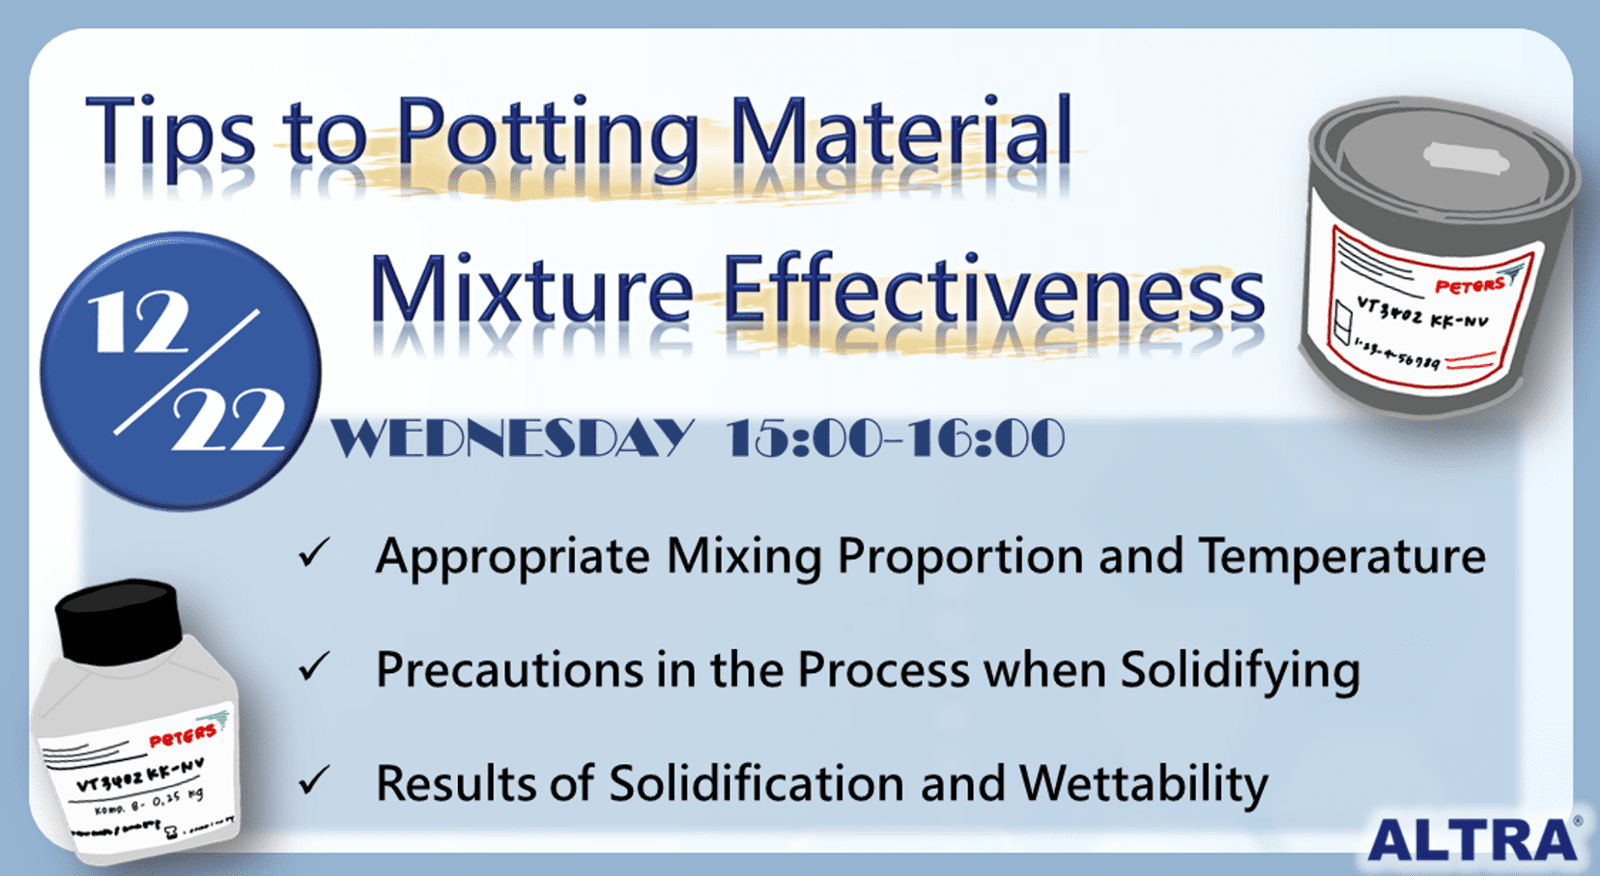 Get Tips to Effective Potting Material Mixture on 12/22 Webinar!